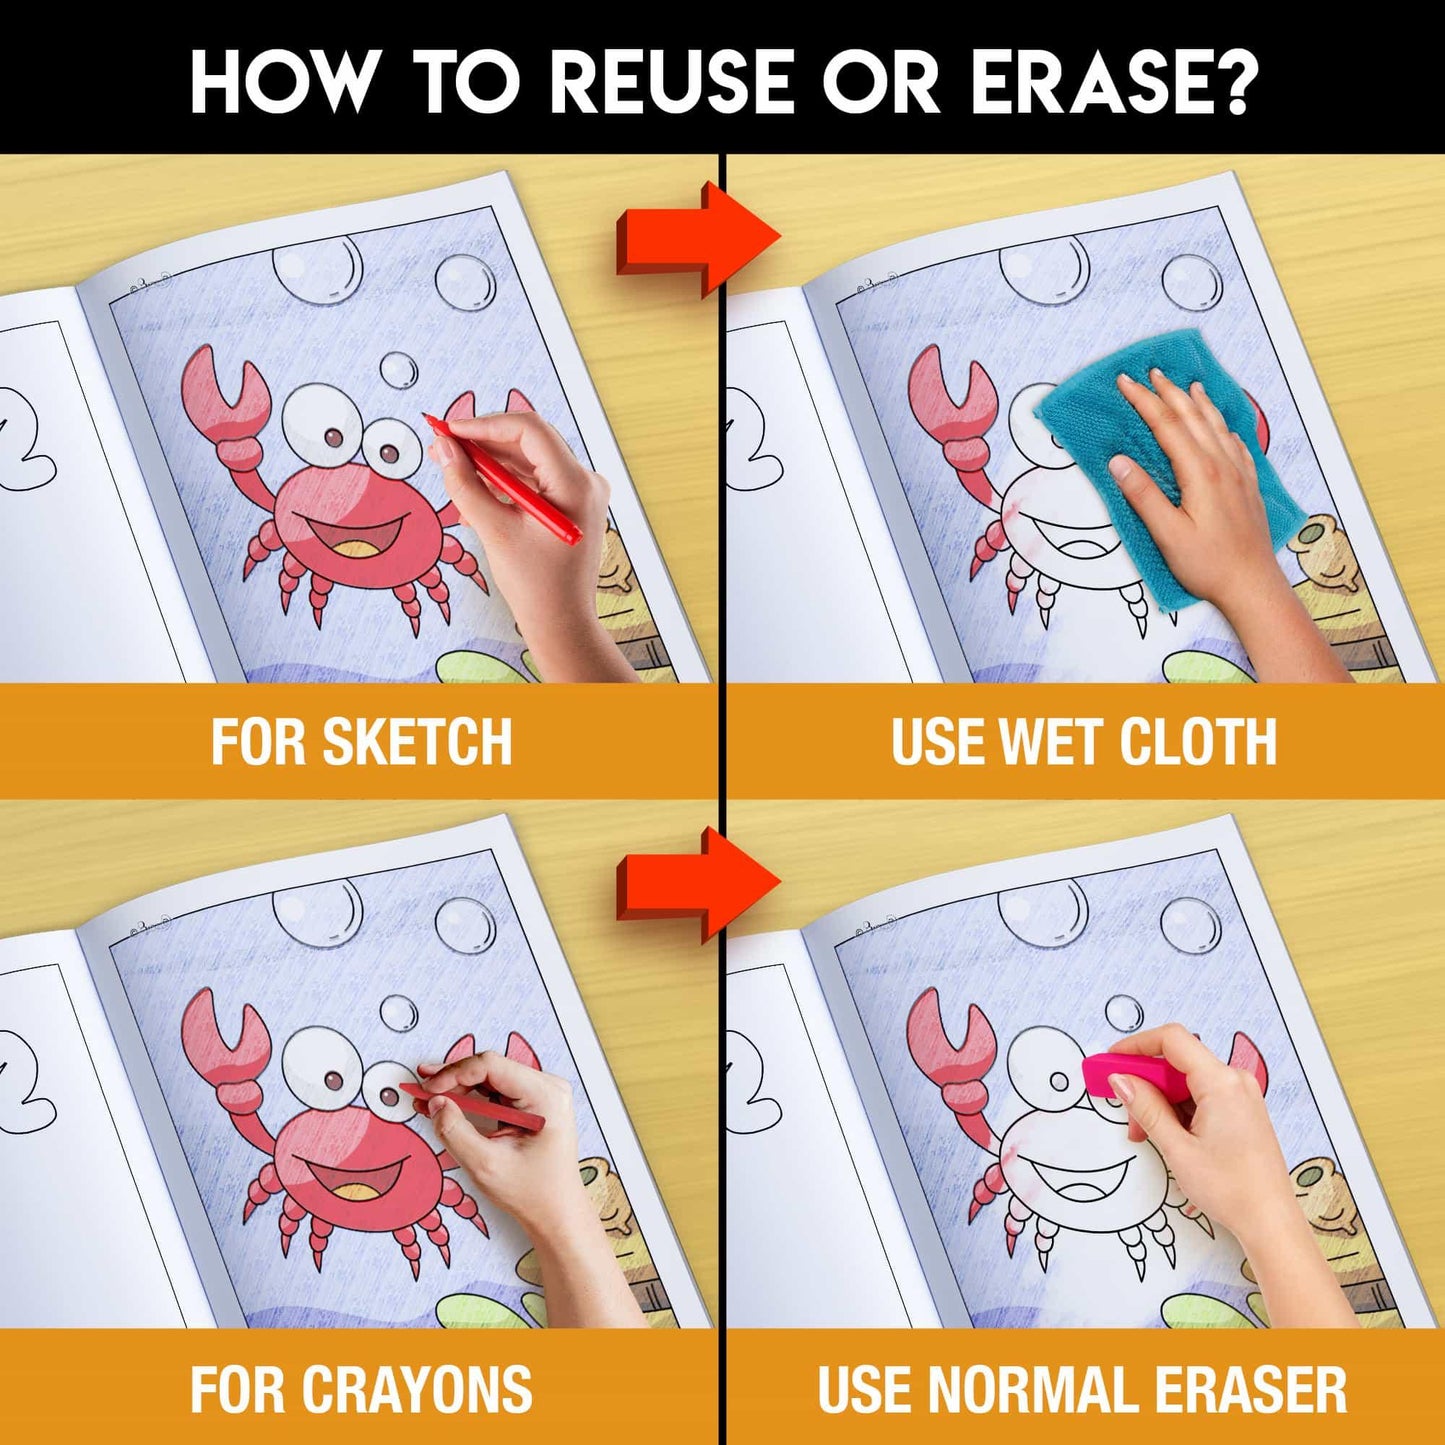 The image has a yellow background with four pictures demonstrating how to reuse or erase: the first picture depicts sketching on the sheet, the second shows using a wet cloth to remove sketches, the third image displays crayons colouring on the sheet, and the fourth image illustrates erasing crayons with a regular eraser.